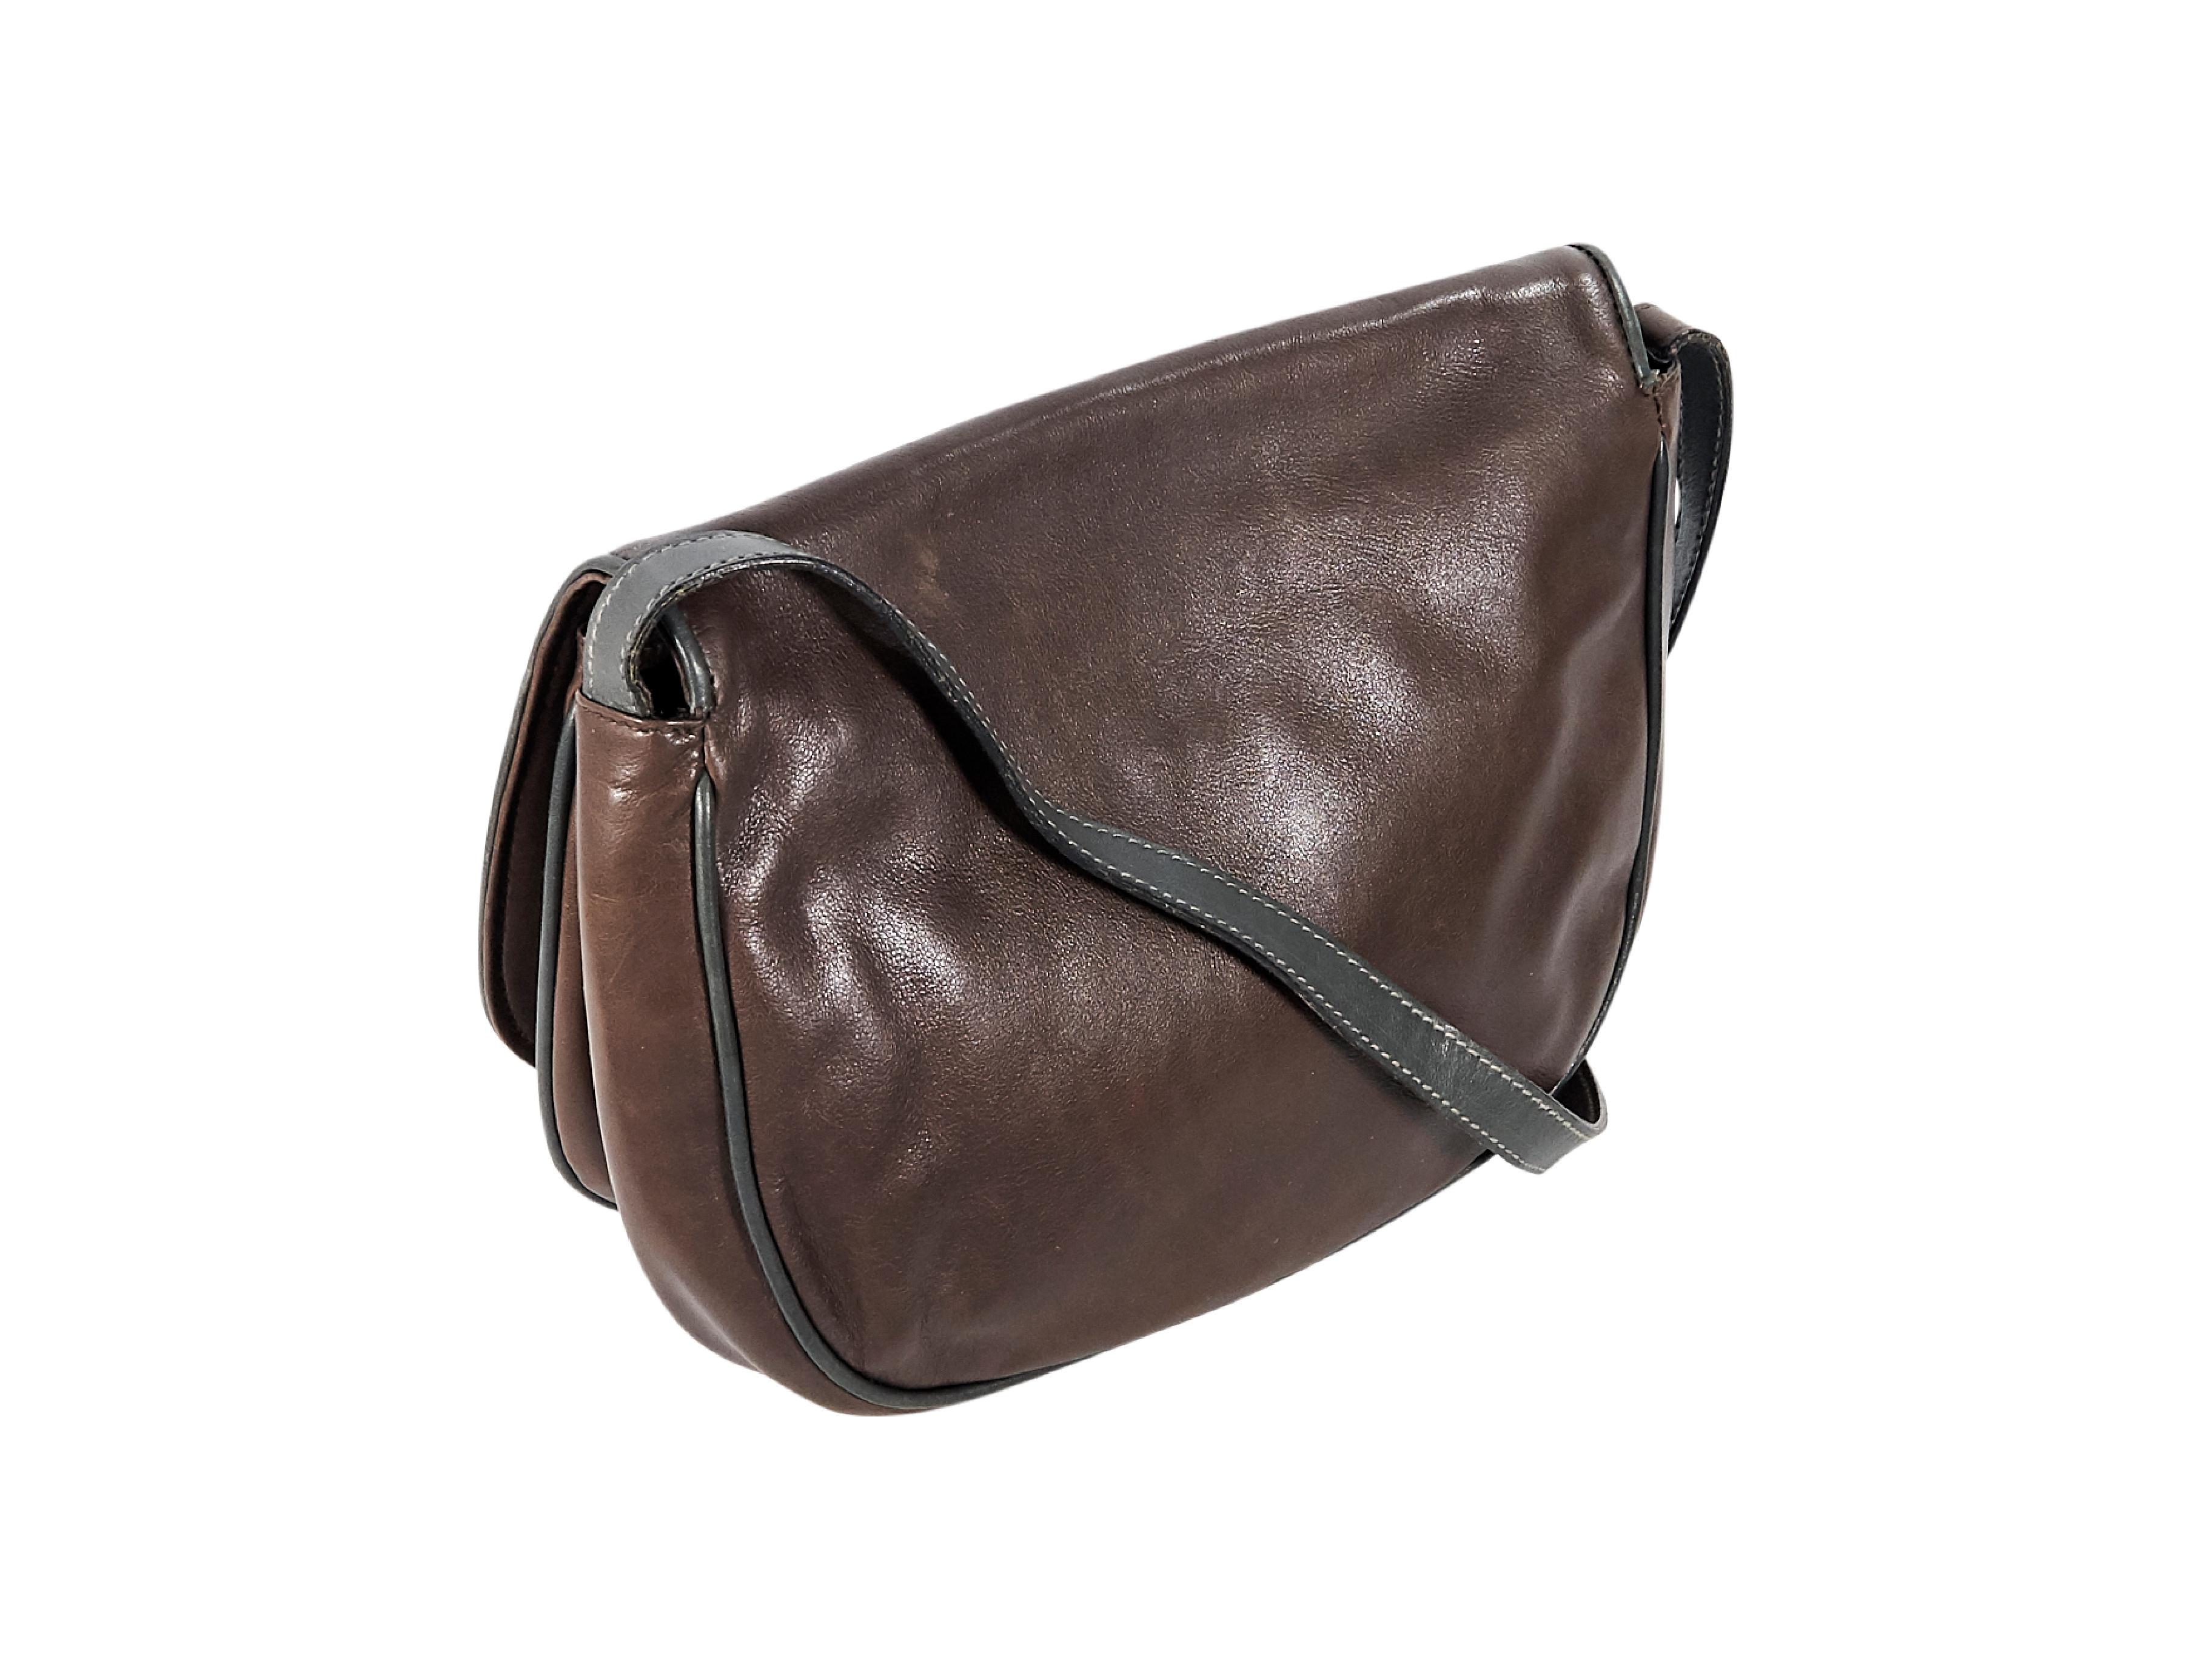 Product details:  Vintage brown leather crossbody bag by Valentino.  Two inner open compartments.  Lined interior with inner zip pocket.  Goldtone hardware.  9.5